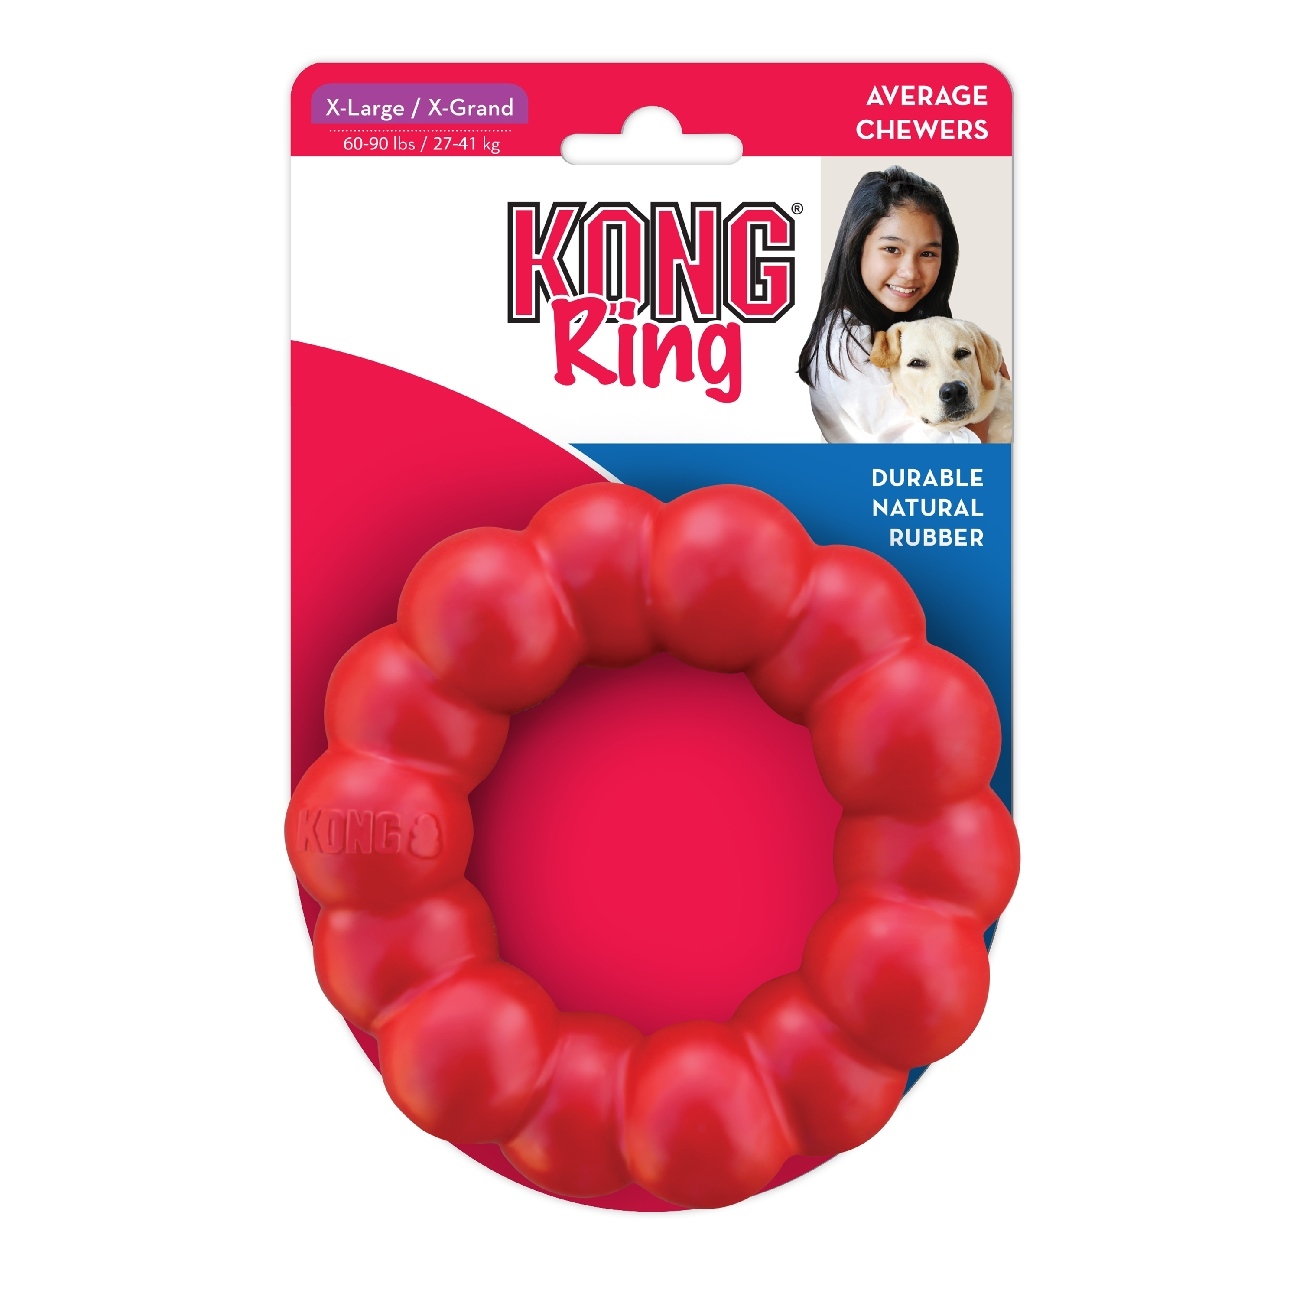 KONG Natural Red Rubber Ring Dog Toy for Healthy Teeth & Gums - X-Large image 1